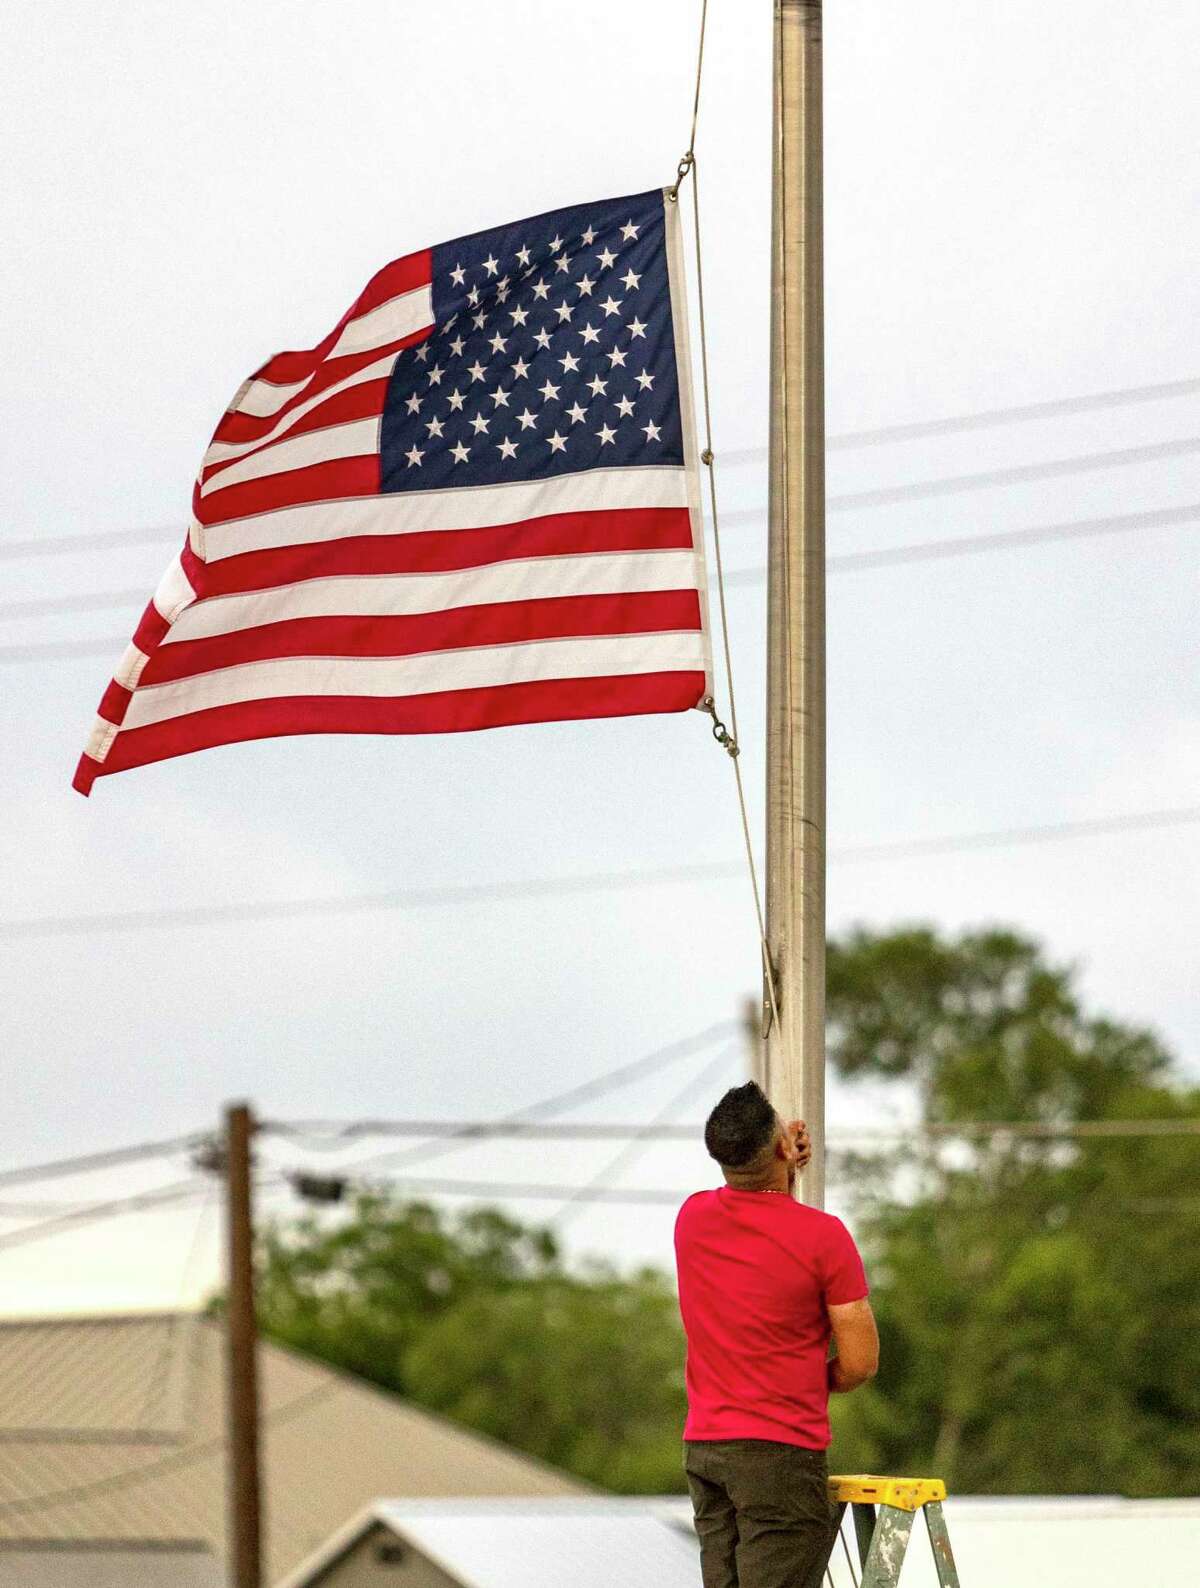 Janish Patel lowers the flag to half staff Tuesday, following the massacre at Robb Elementary School.